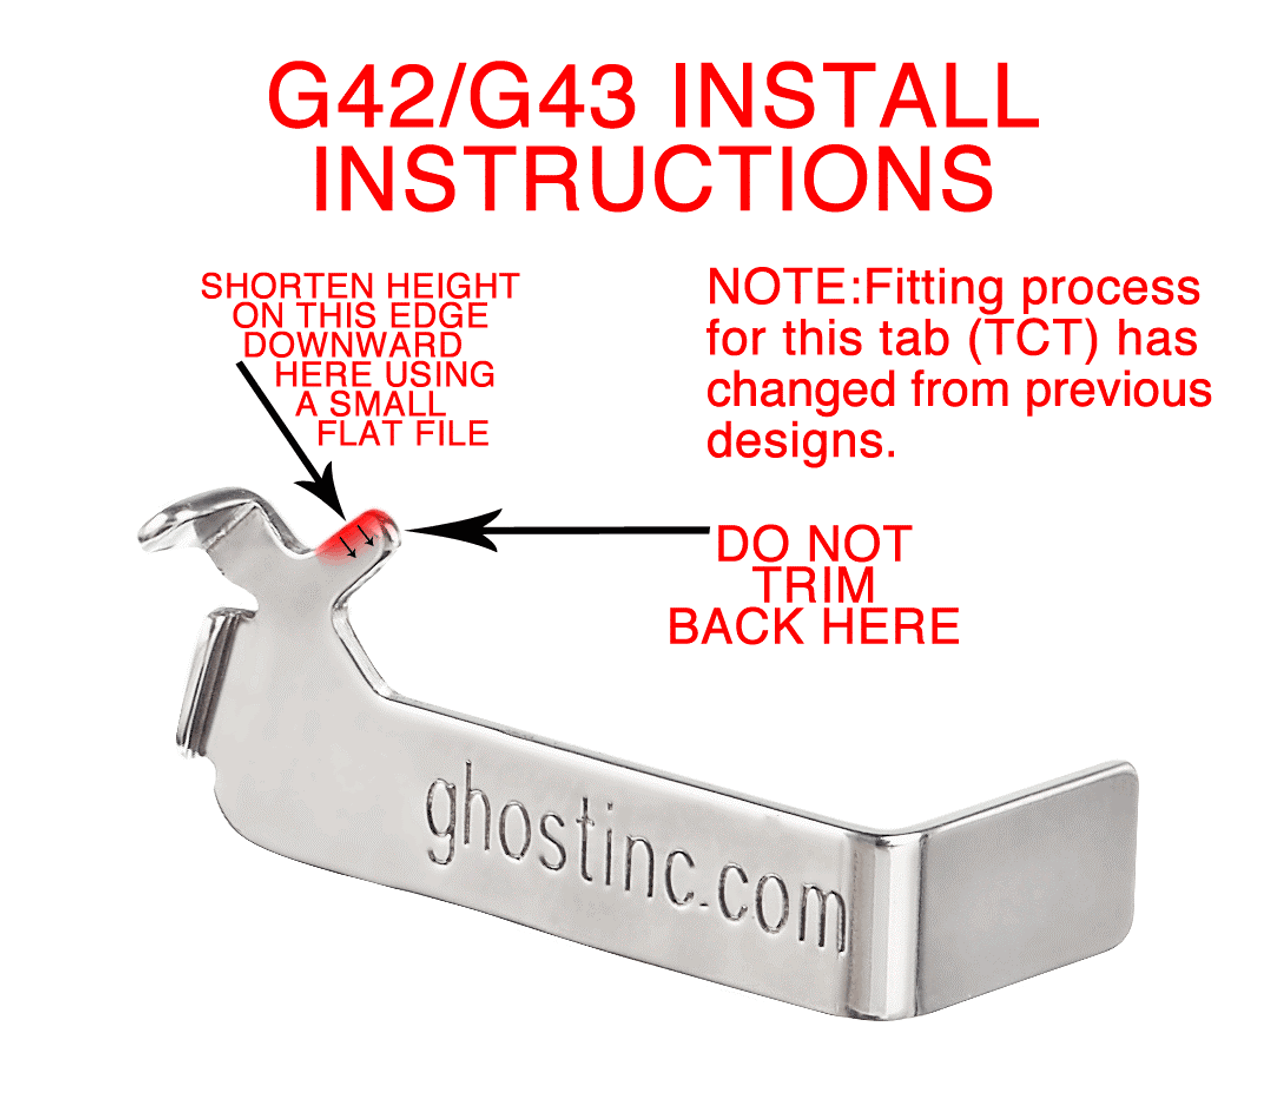 Stainless Steel Pins for Glock 43/43X/48